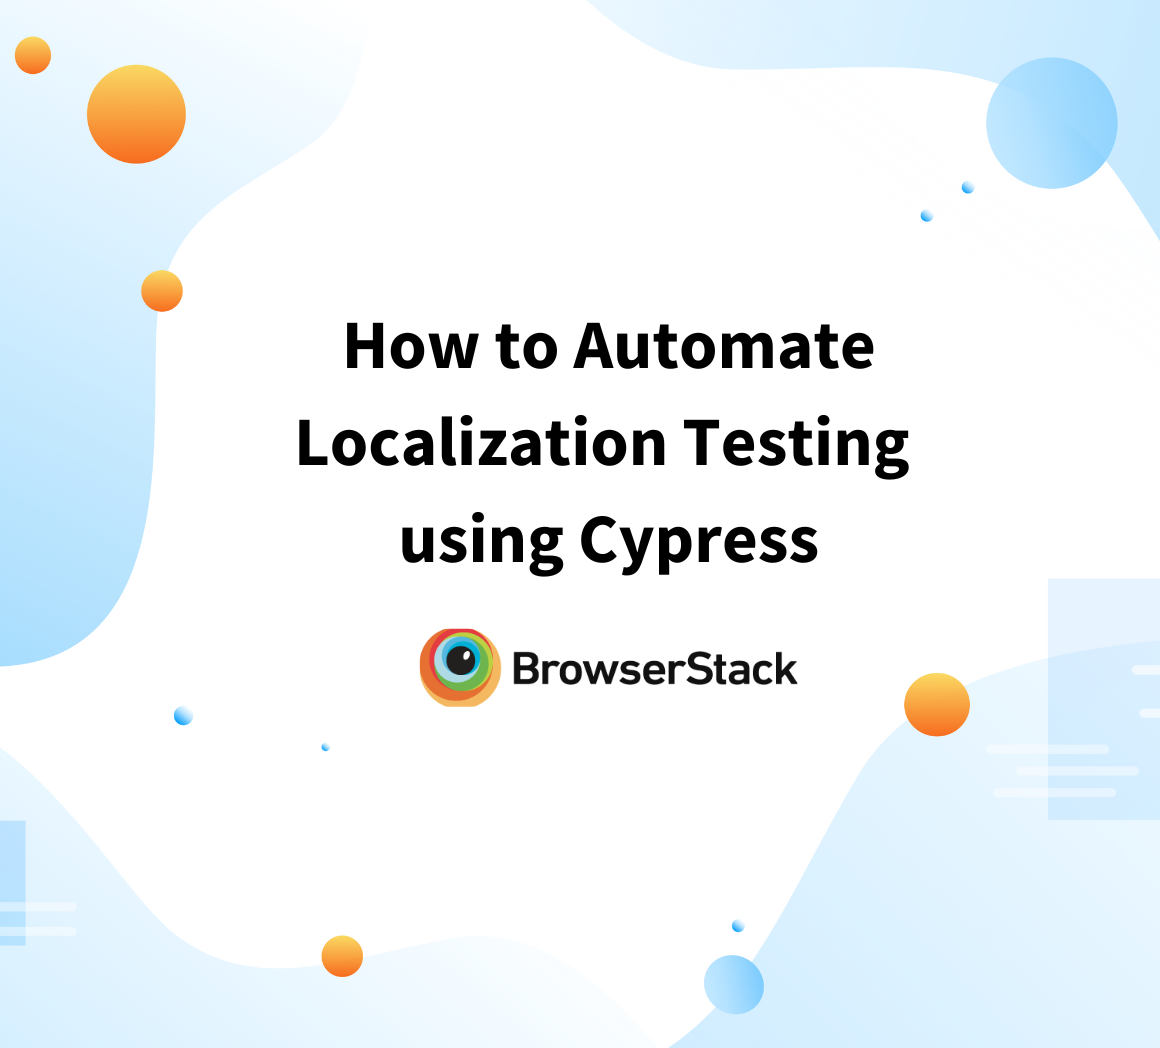 How to Automate Localization Testing using Cypress